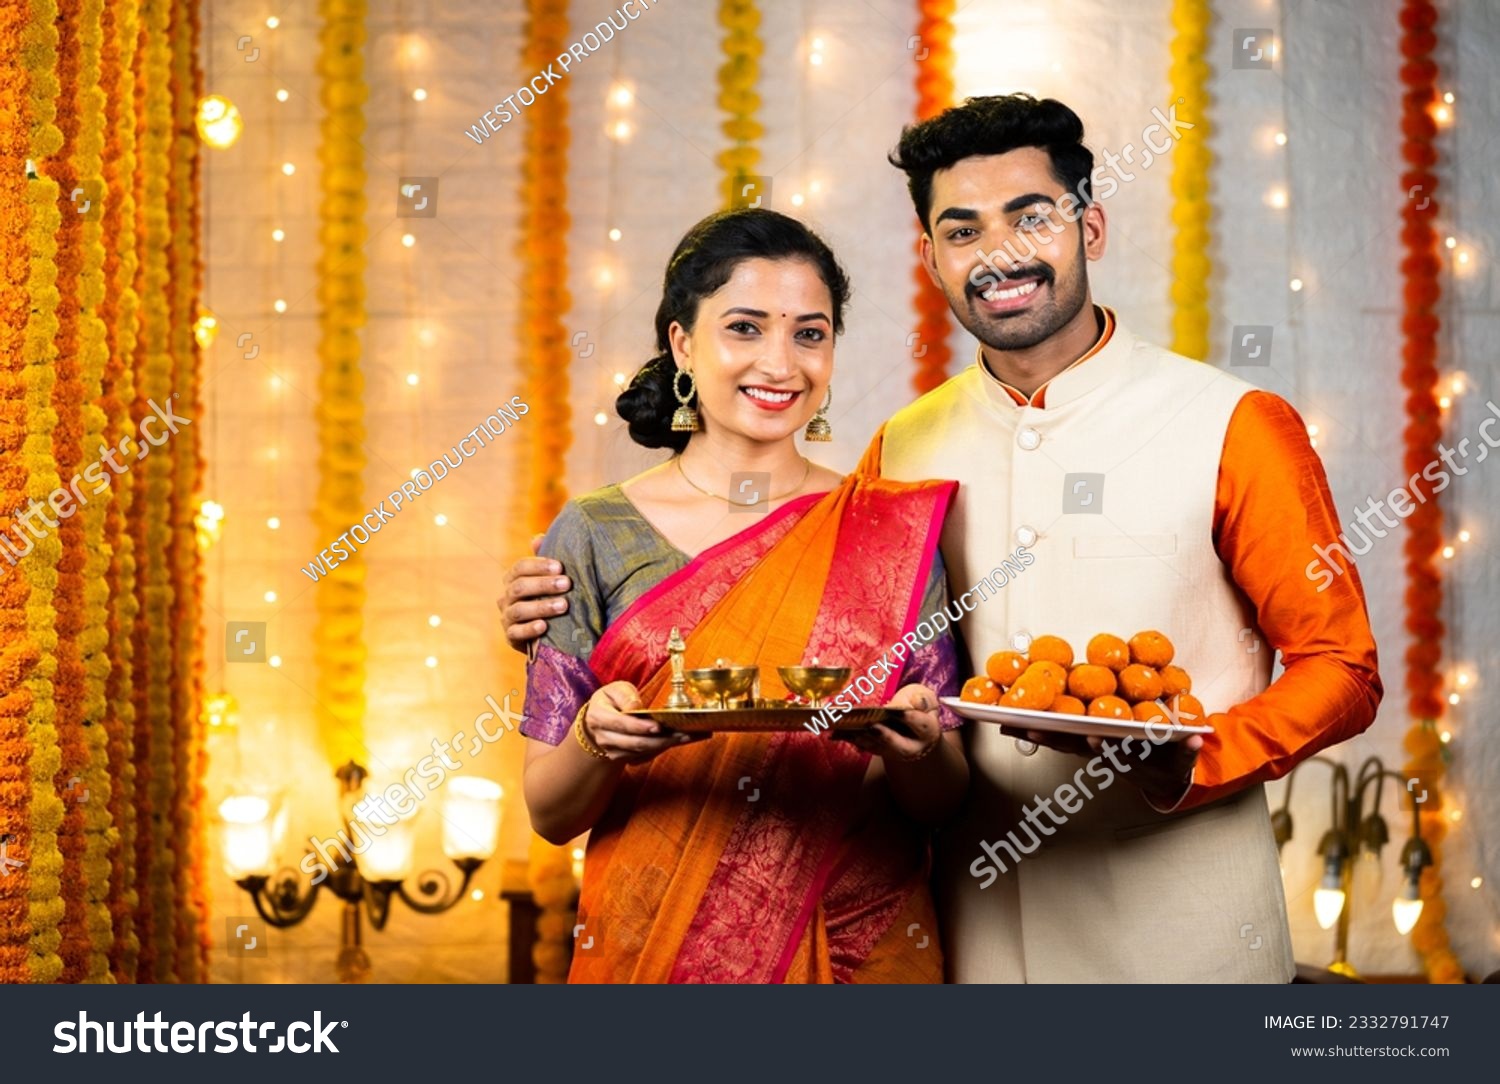 Happy young couple with traditional ethnic wear looking camera by holding sweets and pooja thali or plates - conept of festival celebration, rituals and cultural beliefs #2332791747